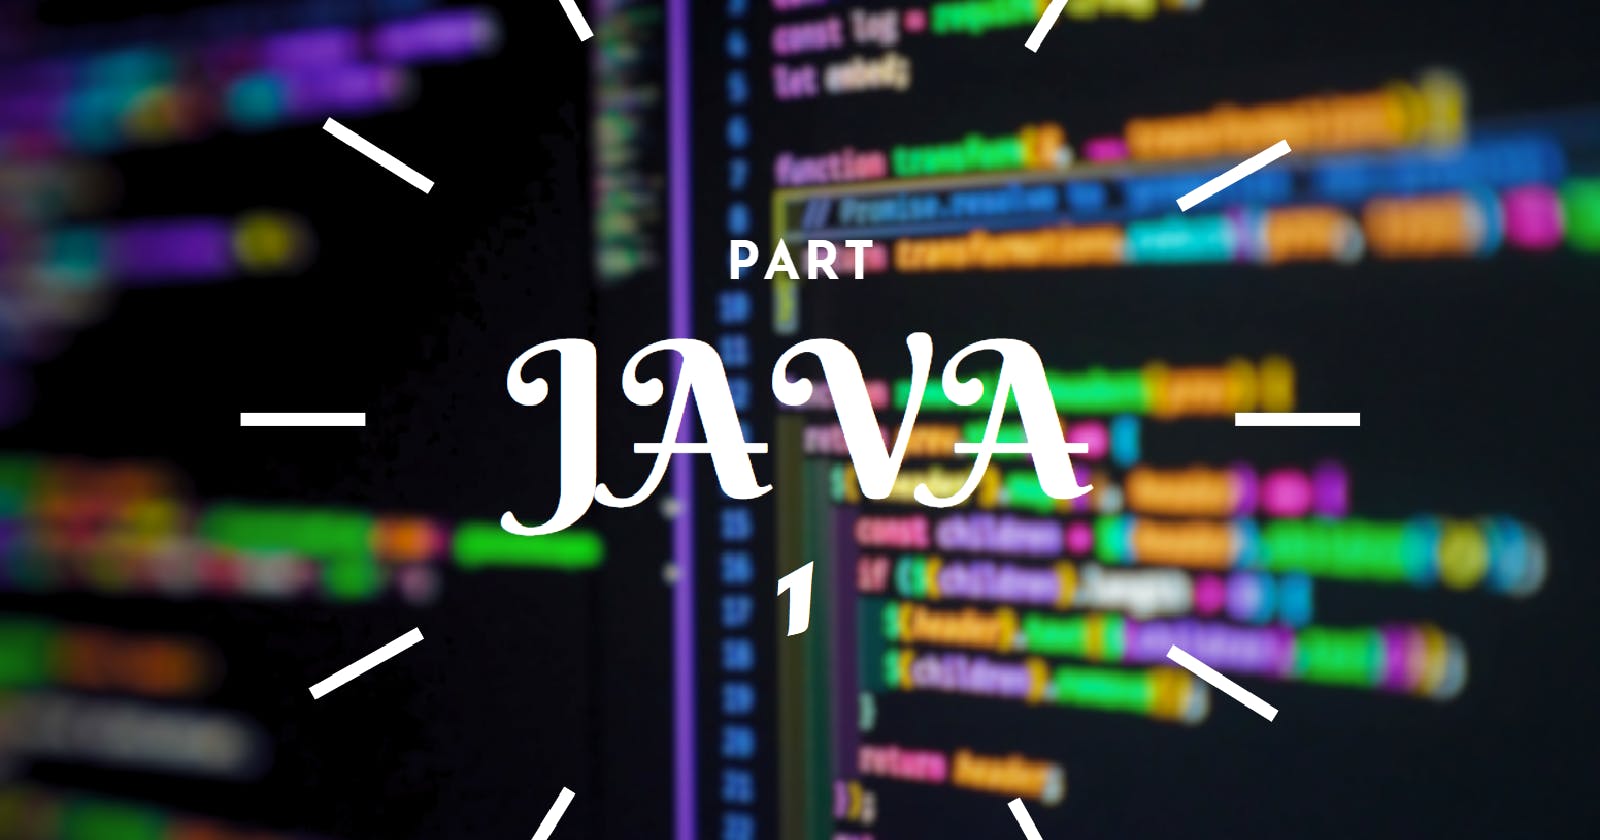 Welcome to Java!